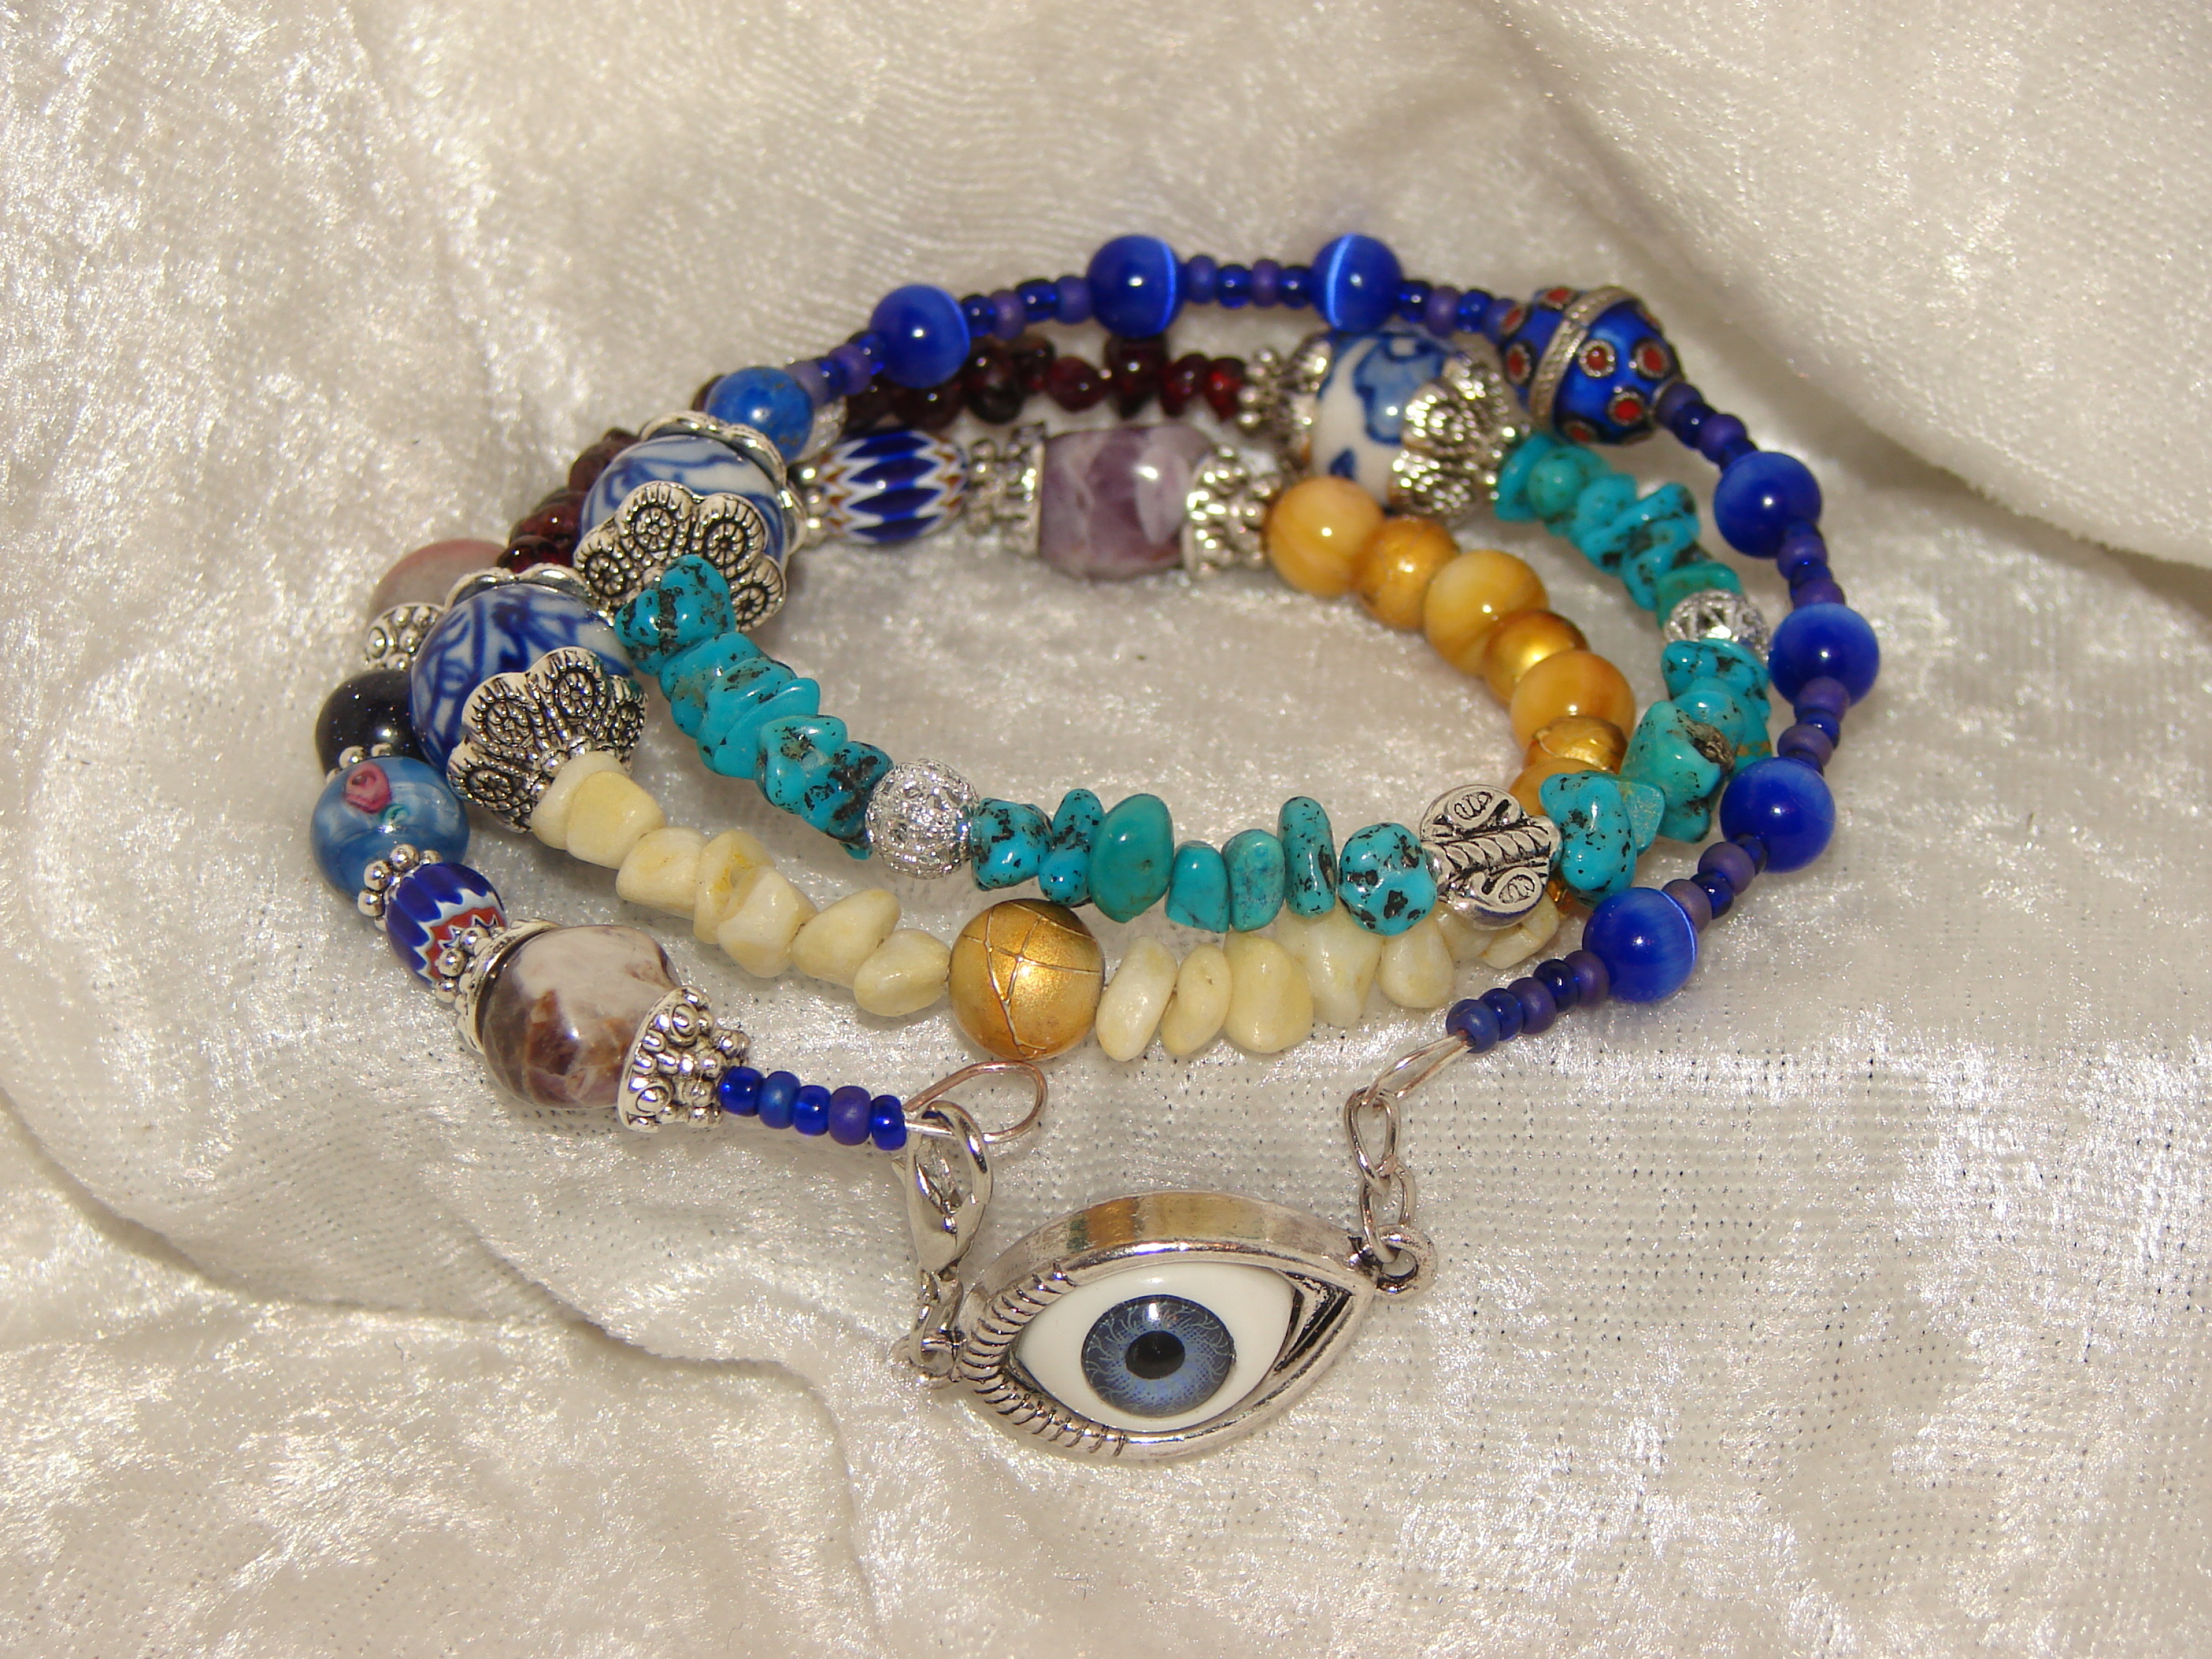 Boho Gypsy Evil Eye Memory Wire Beaded Cuff - Turquoise and Aragonite